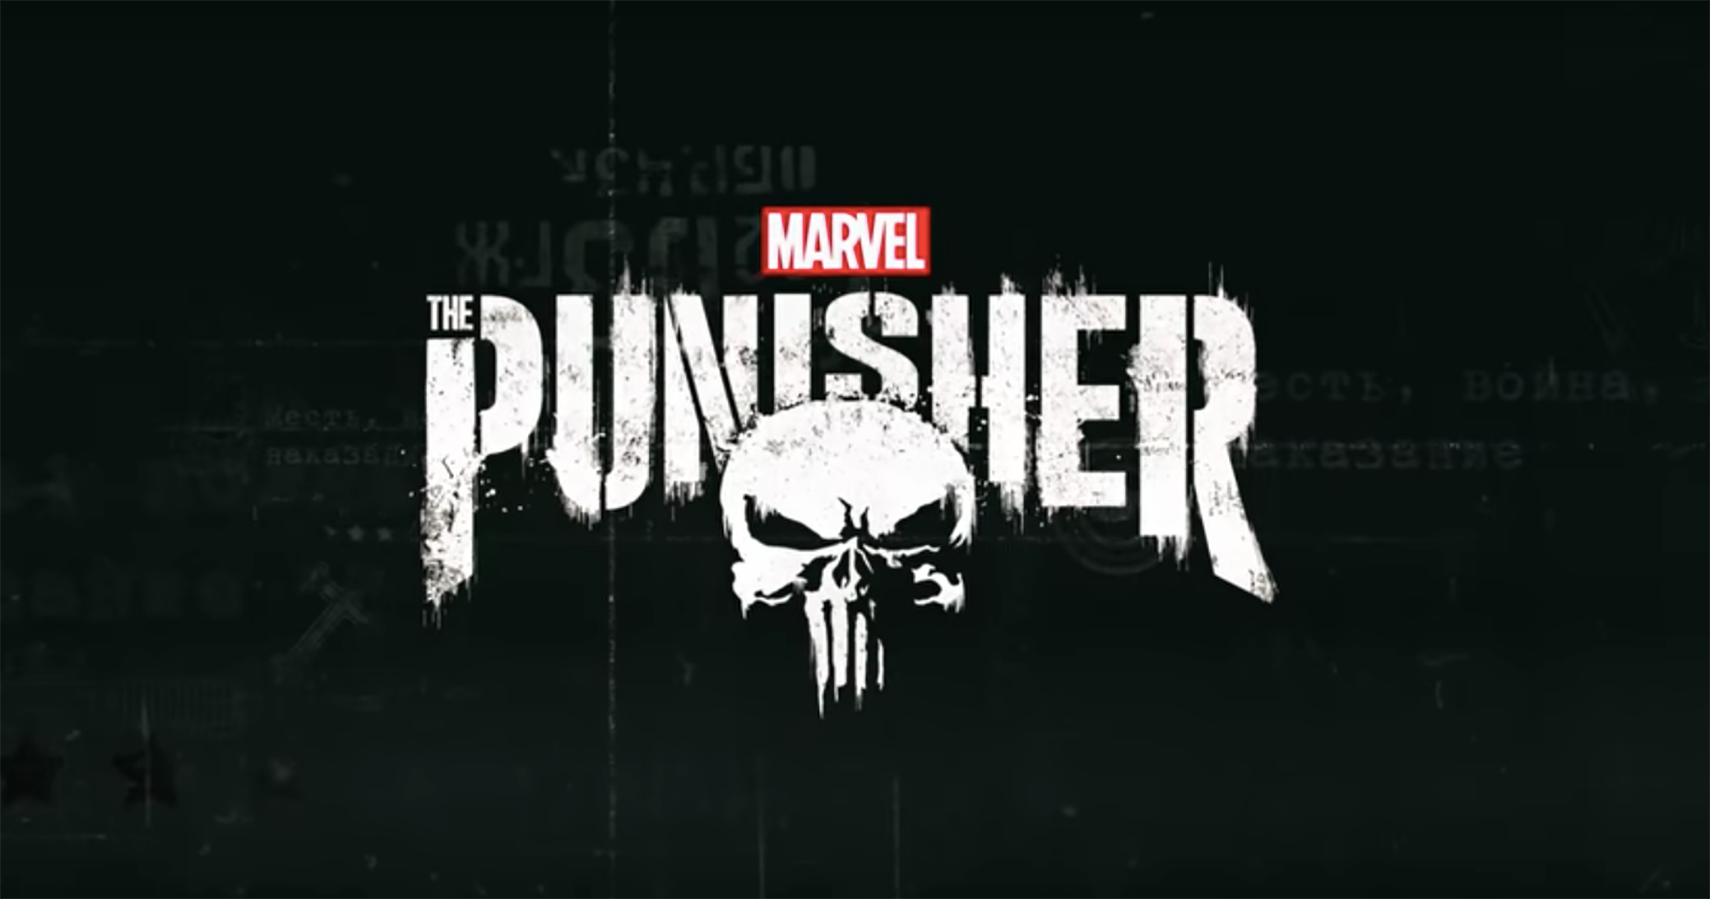 Face Of Death: 10 Things You Didn't Know About The Punisher's Skull Logo